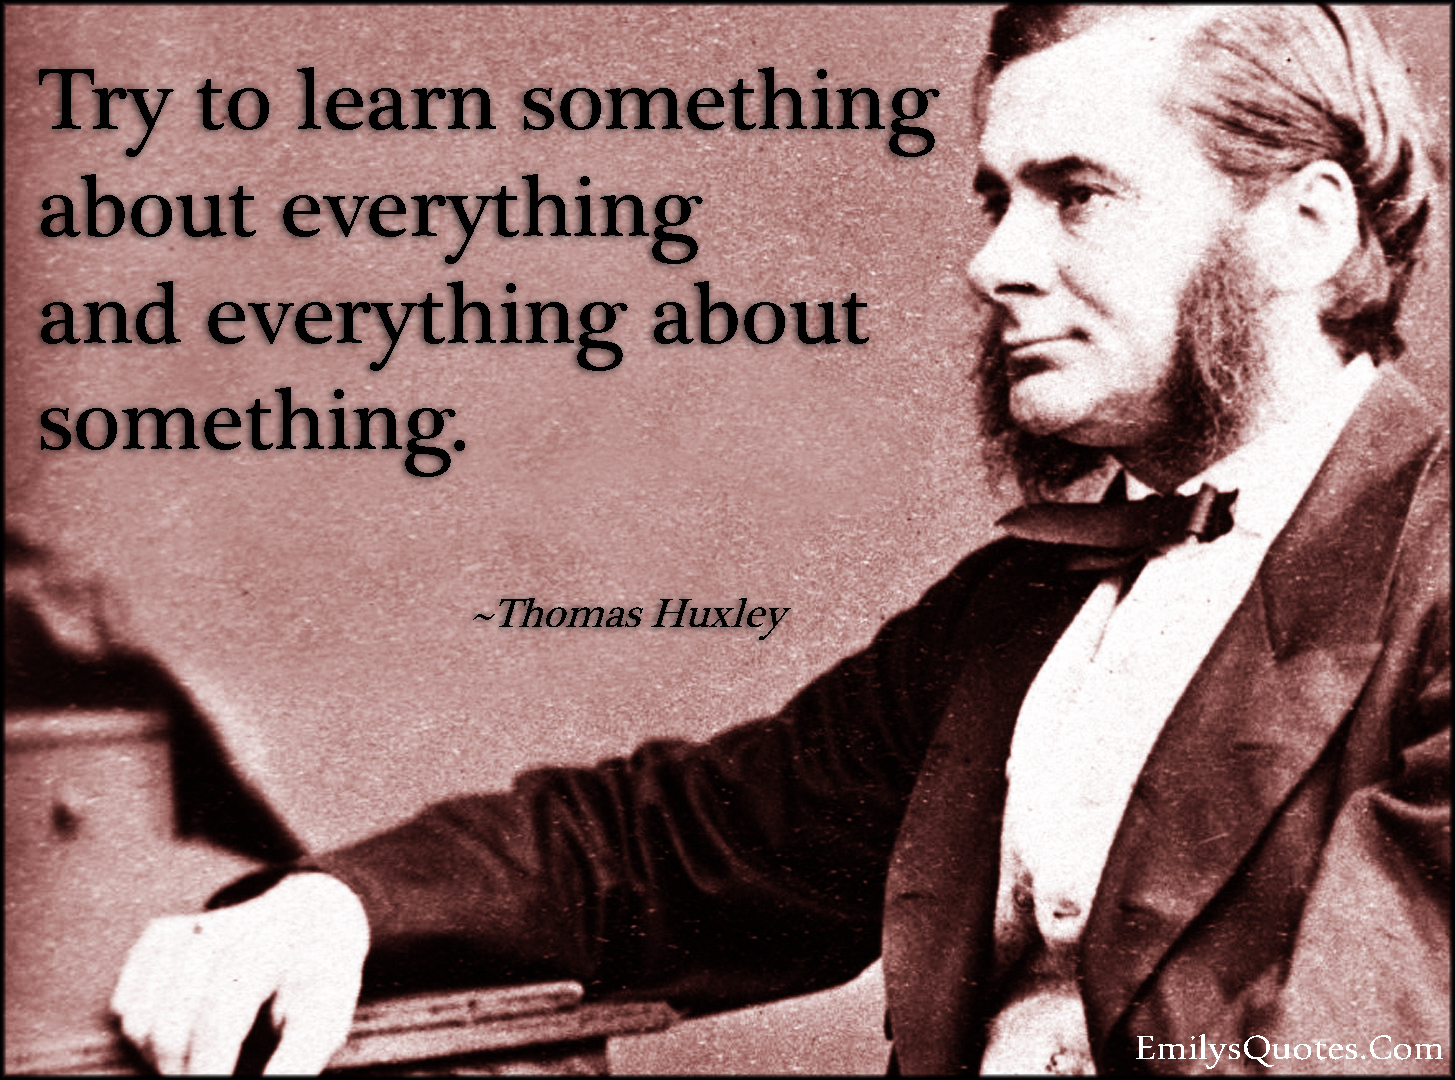 Try to learn something about everything and everything about something